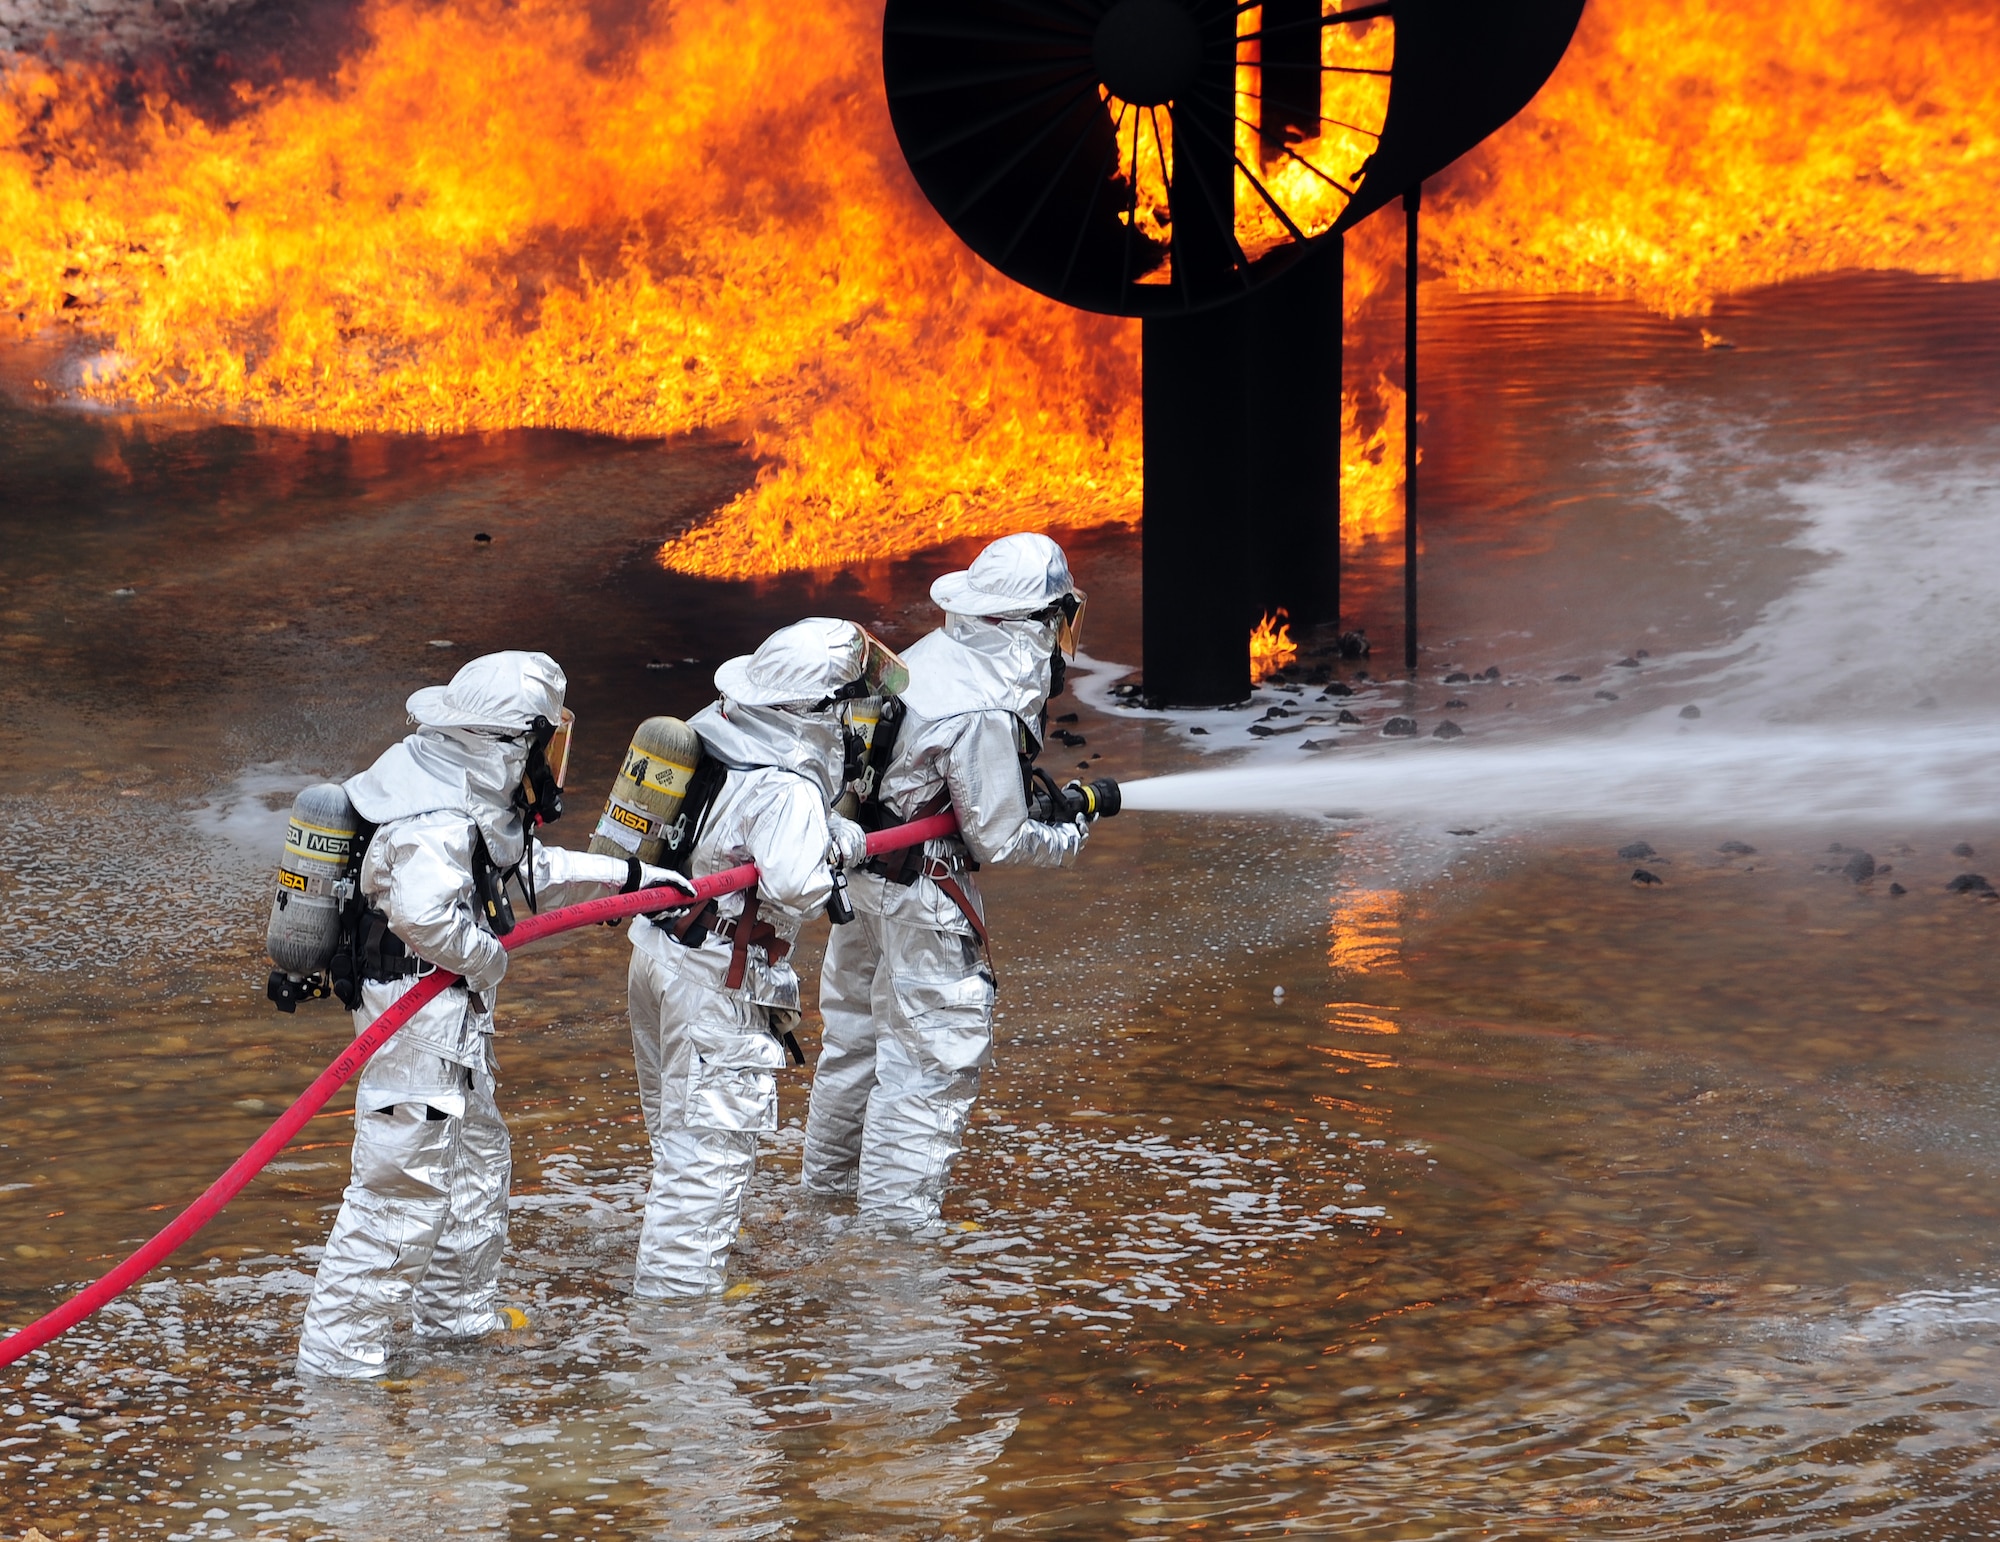 Firefighters from the 7th Civil Engineer Squadron and the Abilene Regional Airport Fire Department extinguish flames during a live fire training exercise April 2, 2014, at Dyess Air Force Base, Texas. The silver fire proximity suits that firefighters wear are manufactured from vacuum-deposited aluminized materials that designed to reflect high radiant heat produced by fire. (U.S. Air Force photo by Senior Airman Kia Atkins/Released)